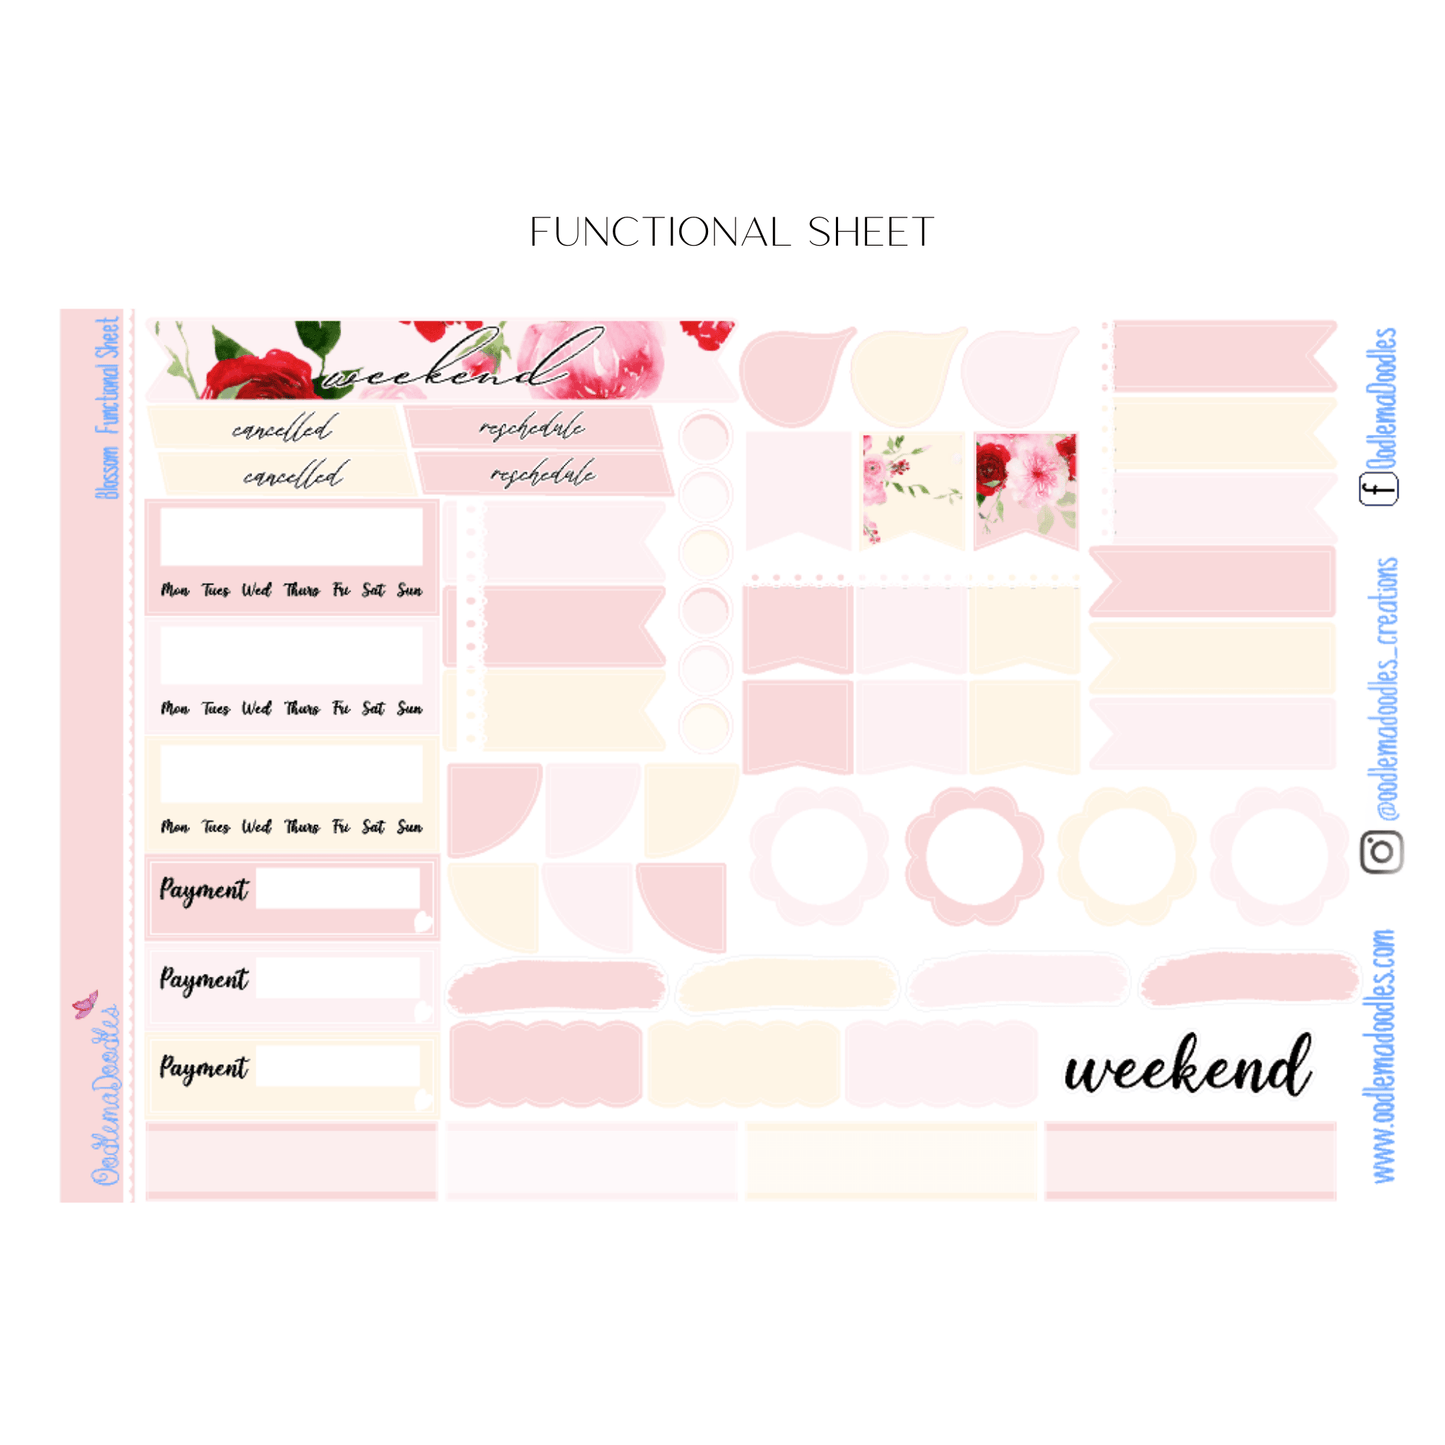 Blossoms Happy Planner Classic - oodlemadoodles